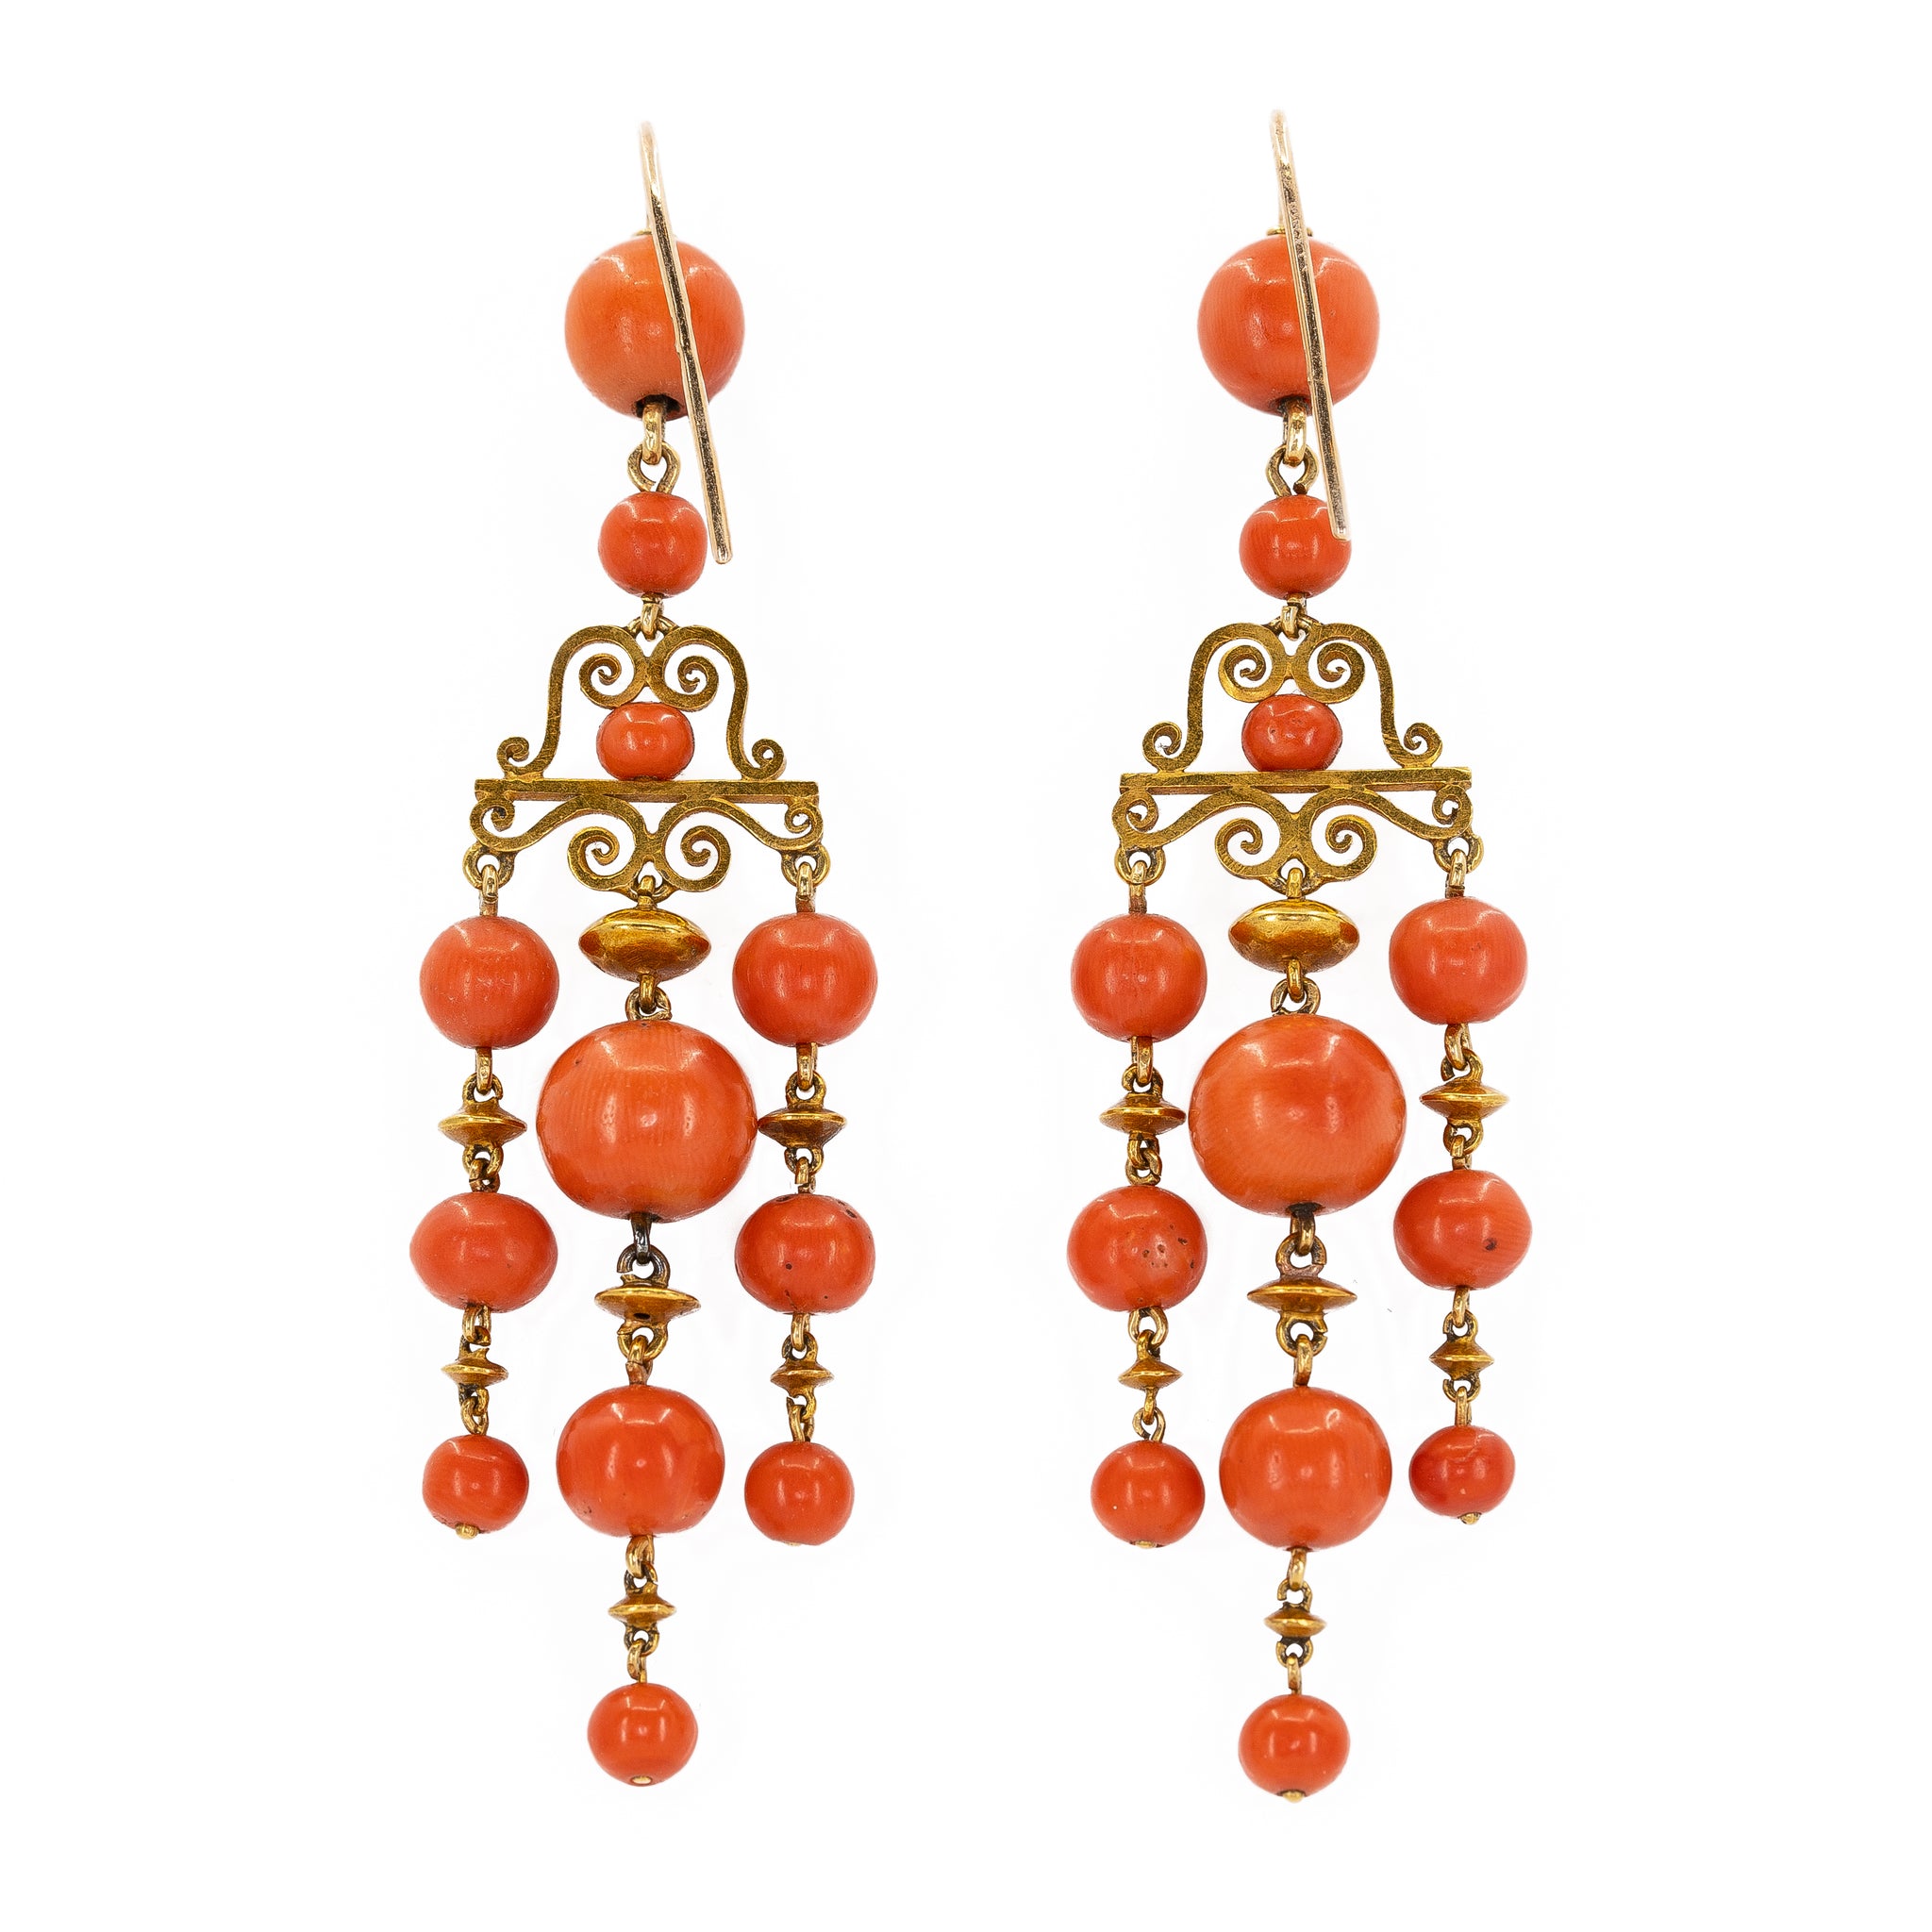 Nineteenth Century French Coral and Gold Earrings